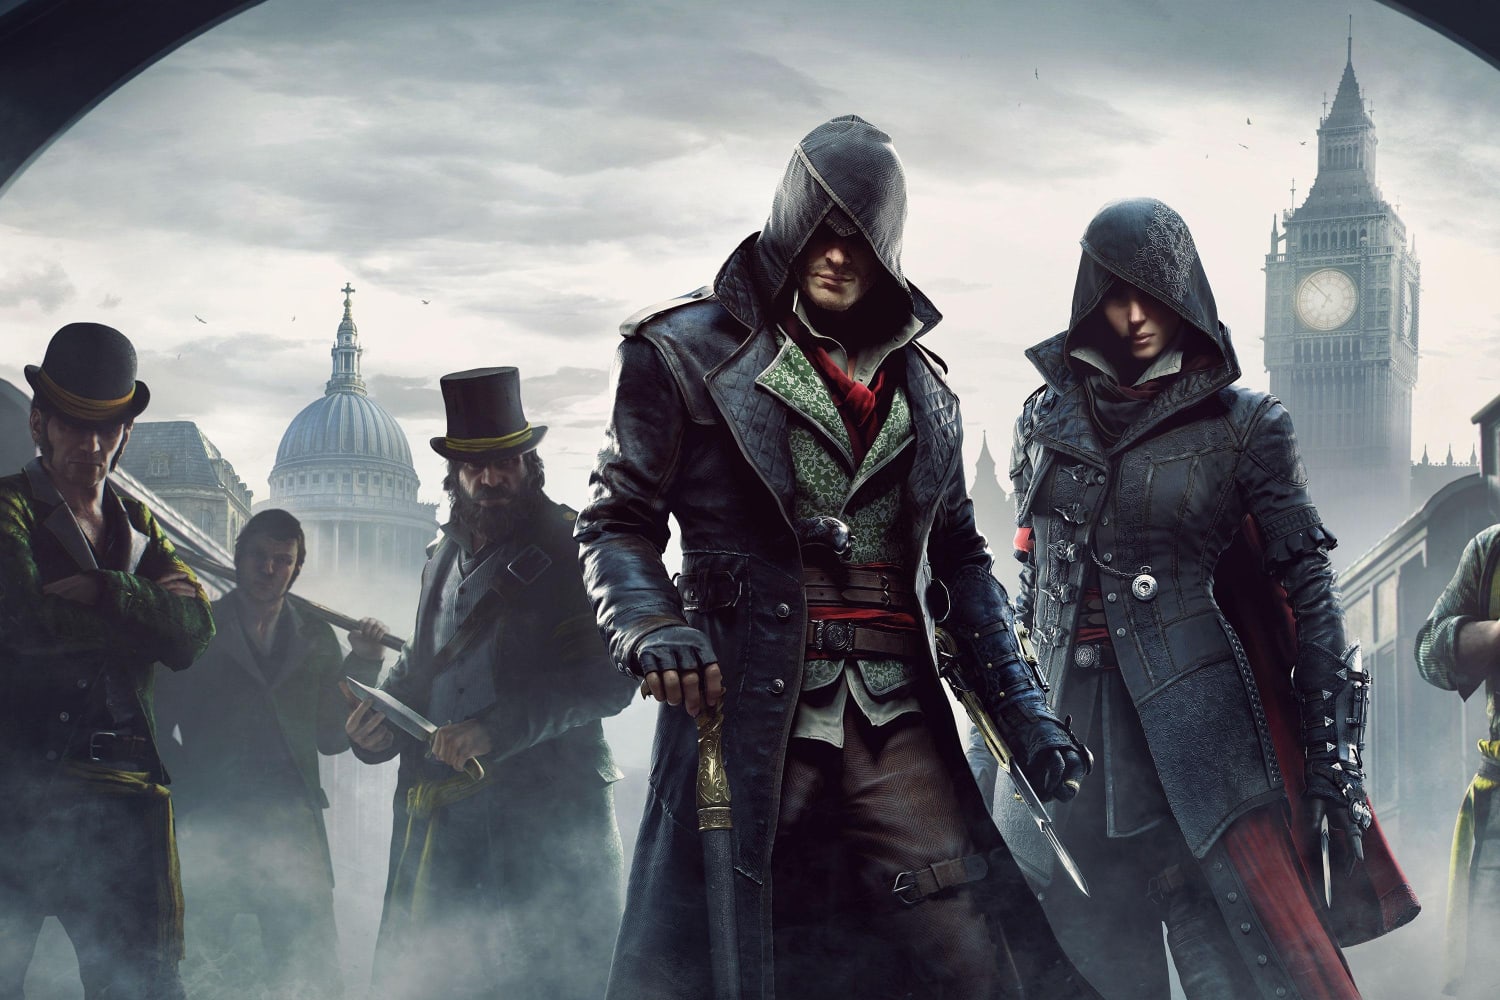 Assassin's Creed Syndicate - Wikipedia